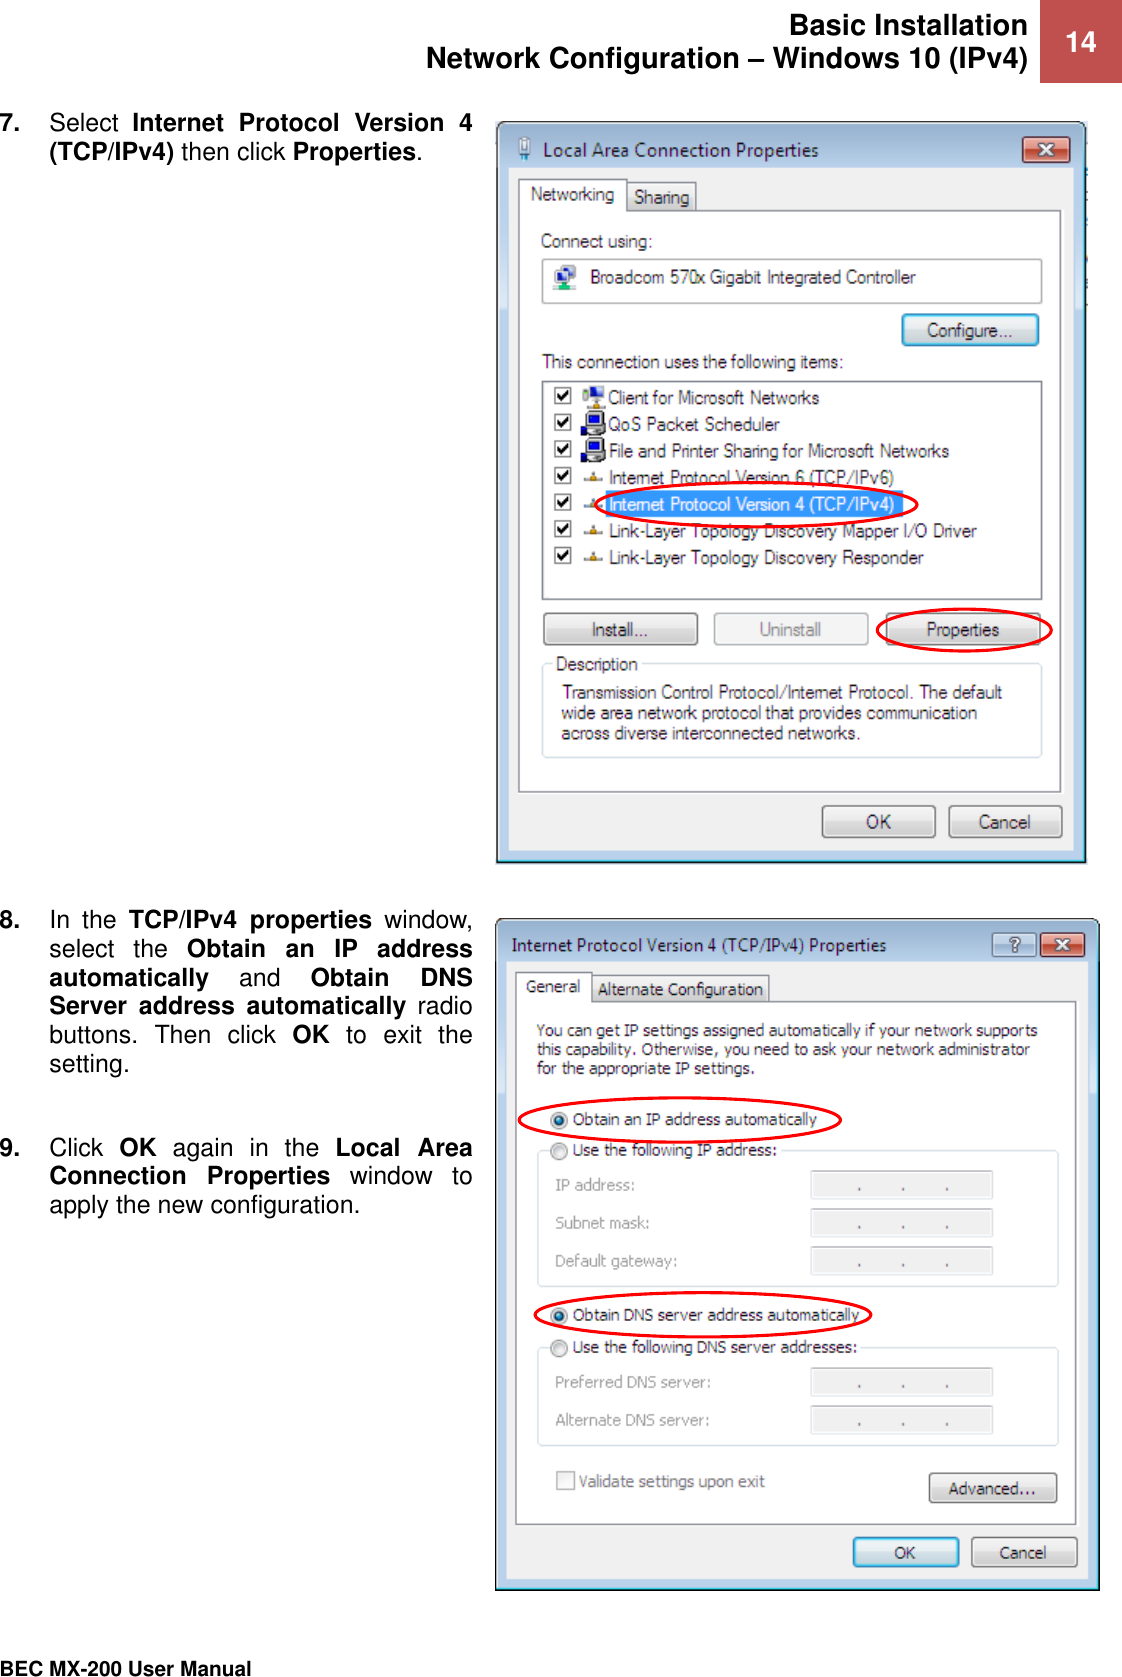 Basic Installation Network Configuration – Windows 10 (IPv4) 14   BEC MX-200 User Manual  7. Select  Internet  Protocol  Version  4 (TCP/IPv4) then click Properties.    8. In  the  TCP/IPv4  properties  window, select  the  Obtain  an  IP  address automatically and  Obtain  DNS Server  address  automatically  radio buttons.  Then  click  OK  to  exit  the setting.  9. Click  OK  again  in  the  Local  Area Connection  Properties  window  to apply the new configuration.  